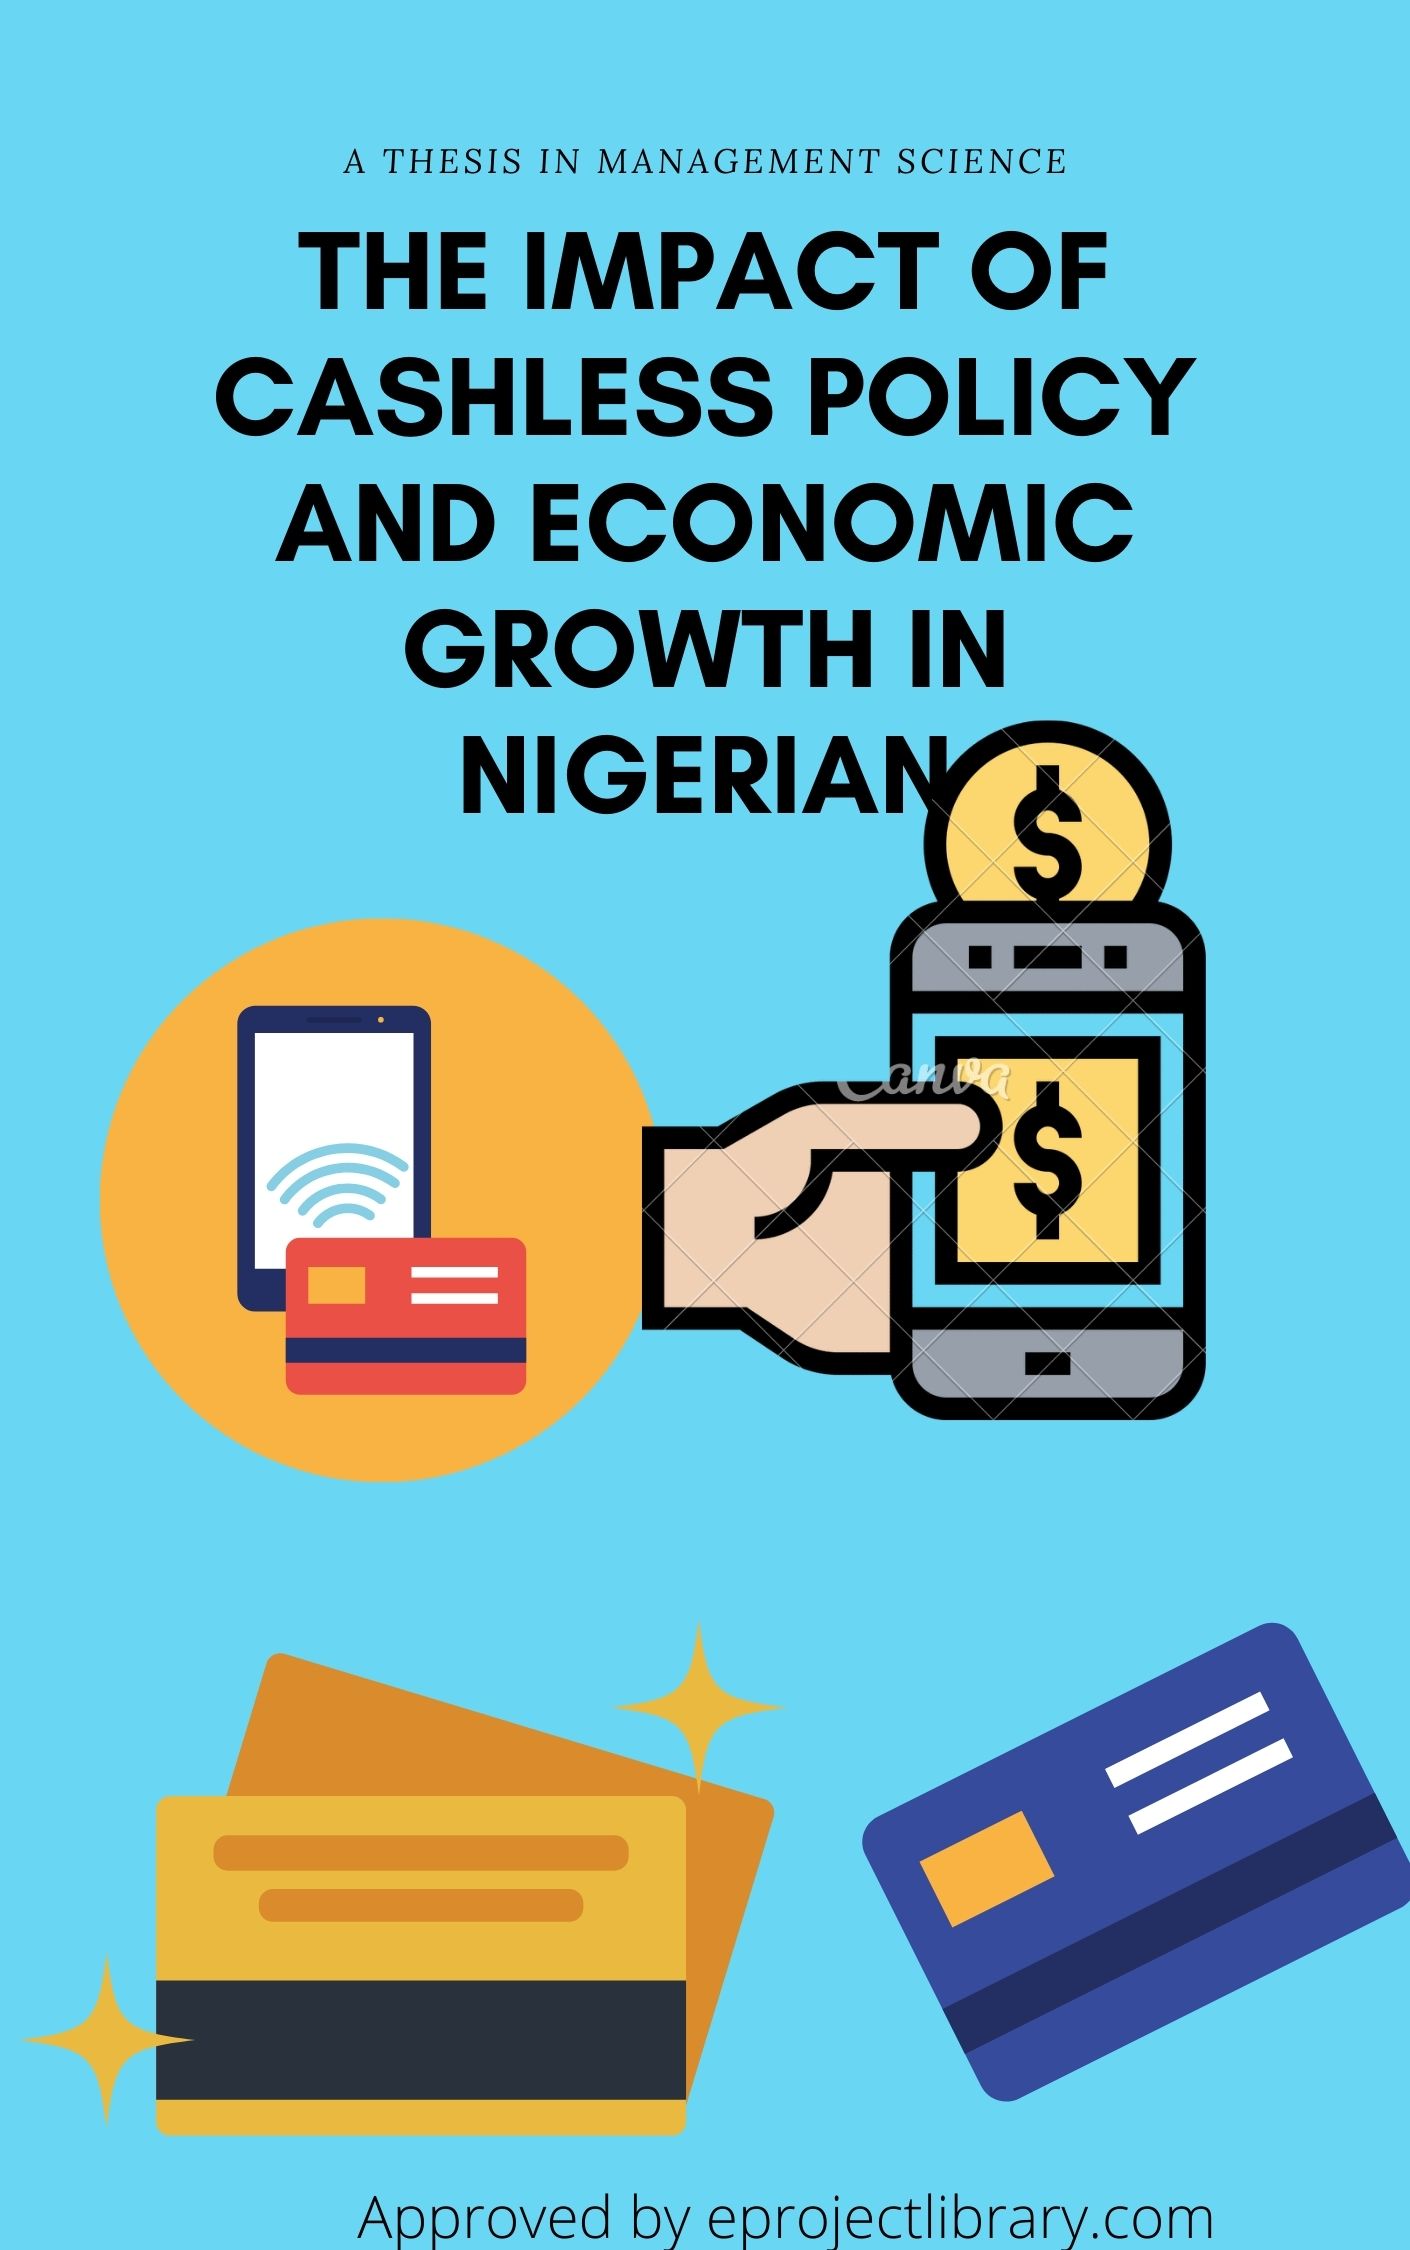 The Impact of Cashless Policy on Economic Growth in Nigeria (PDF)